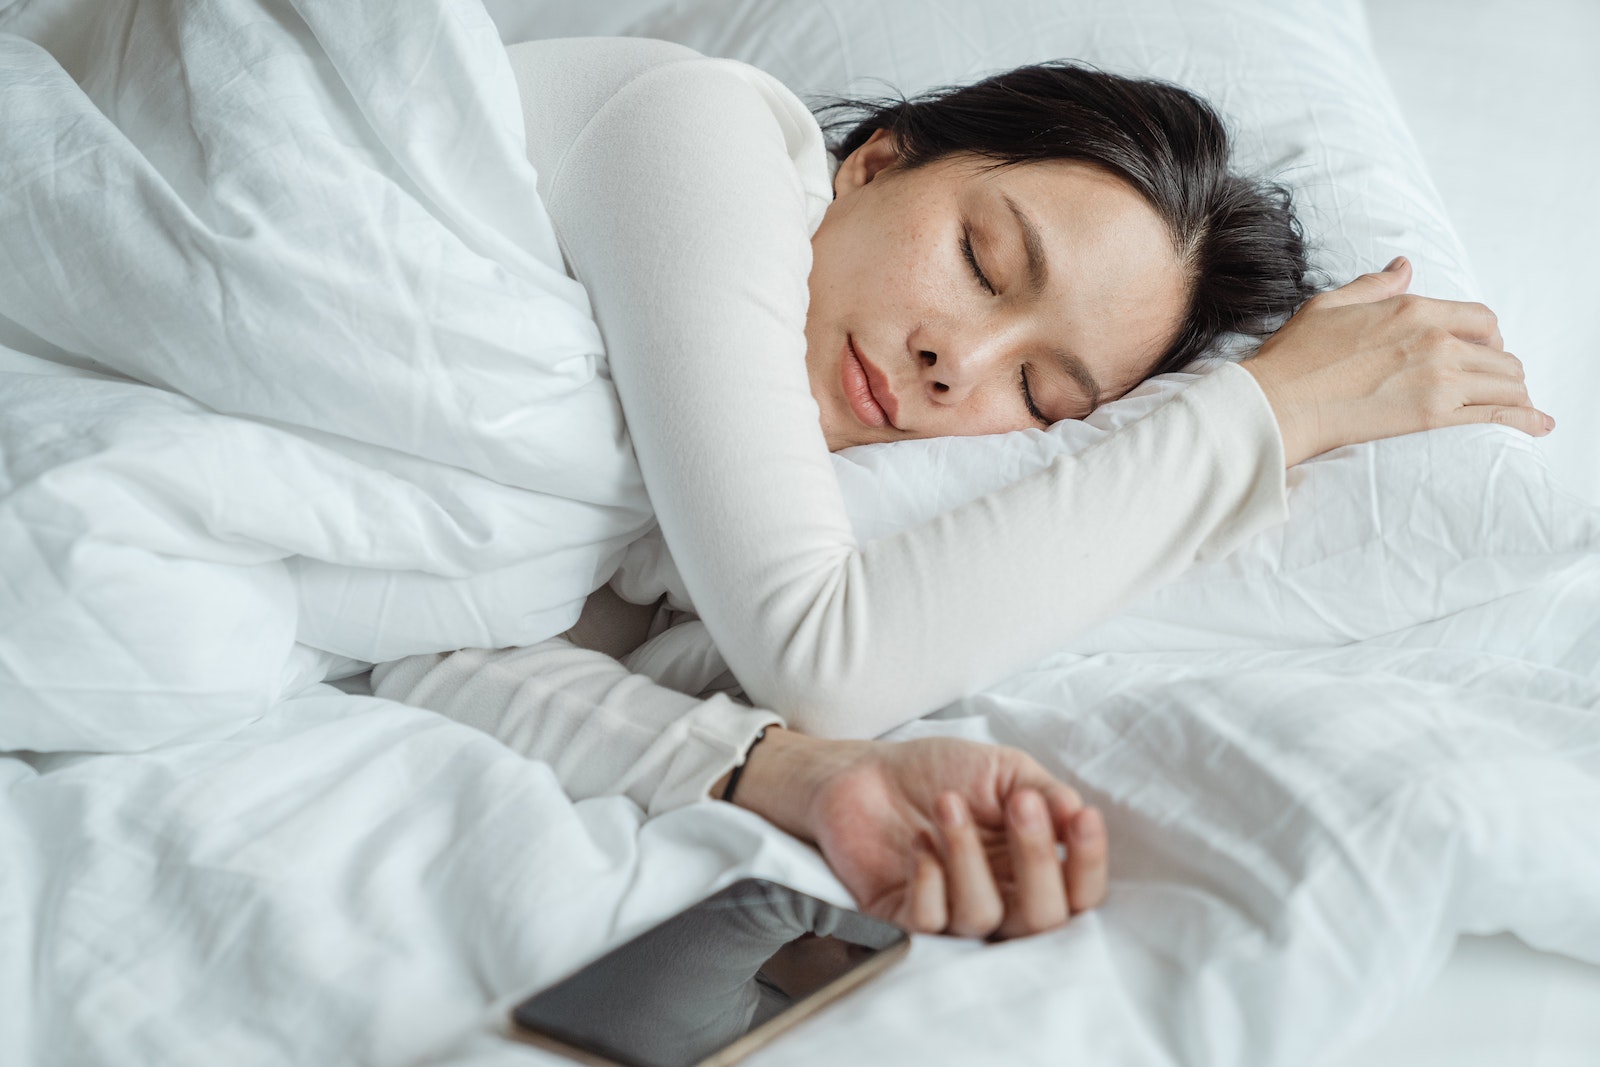 How does sleep affect hunger hormones ghrelin